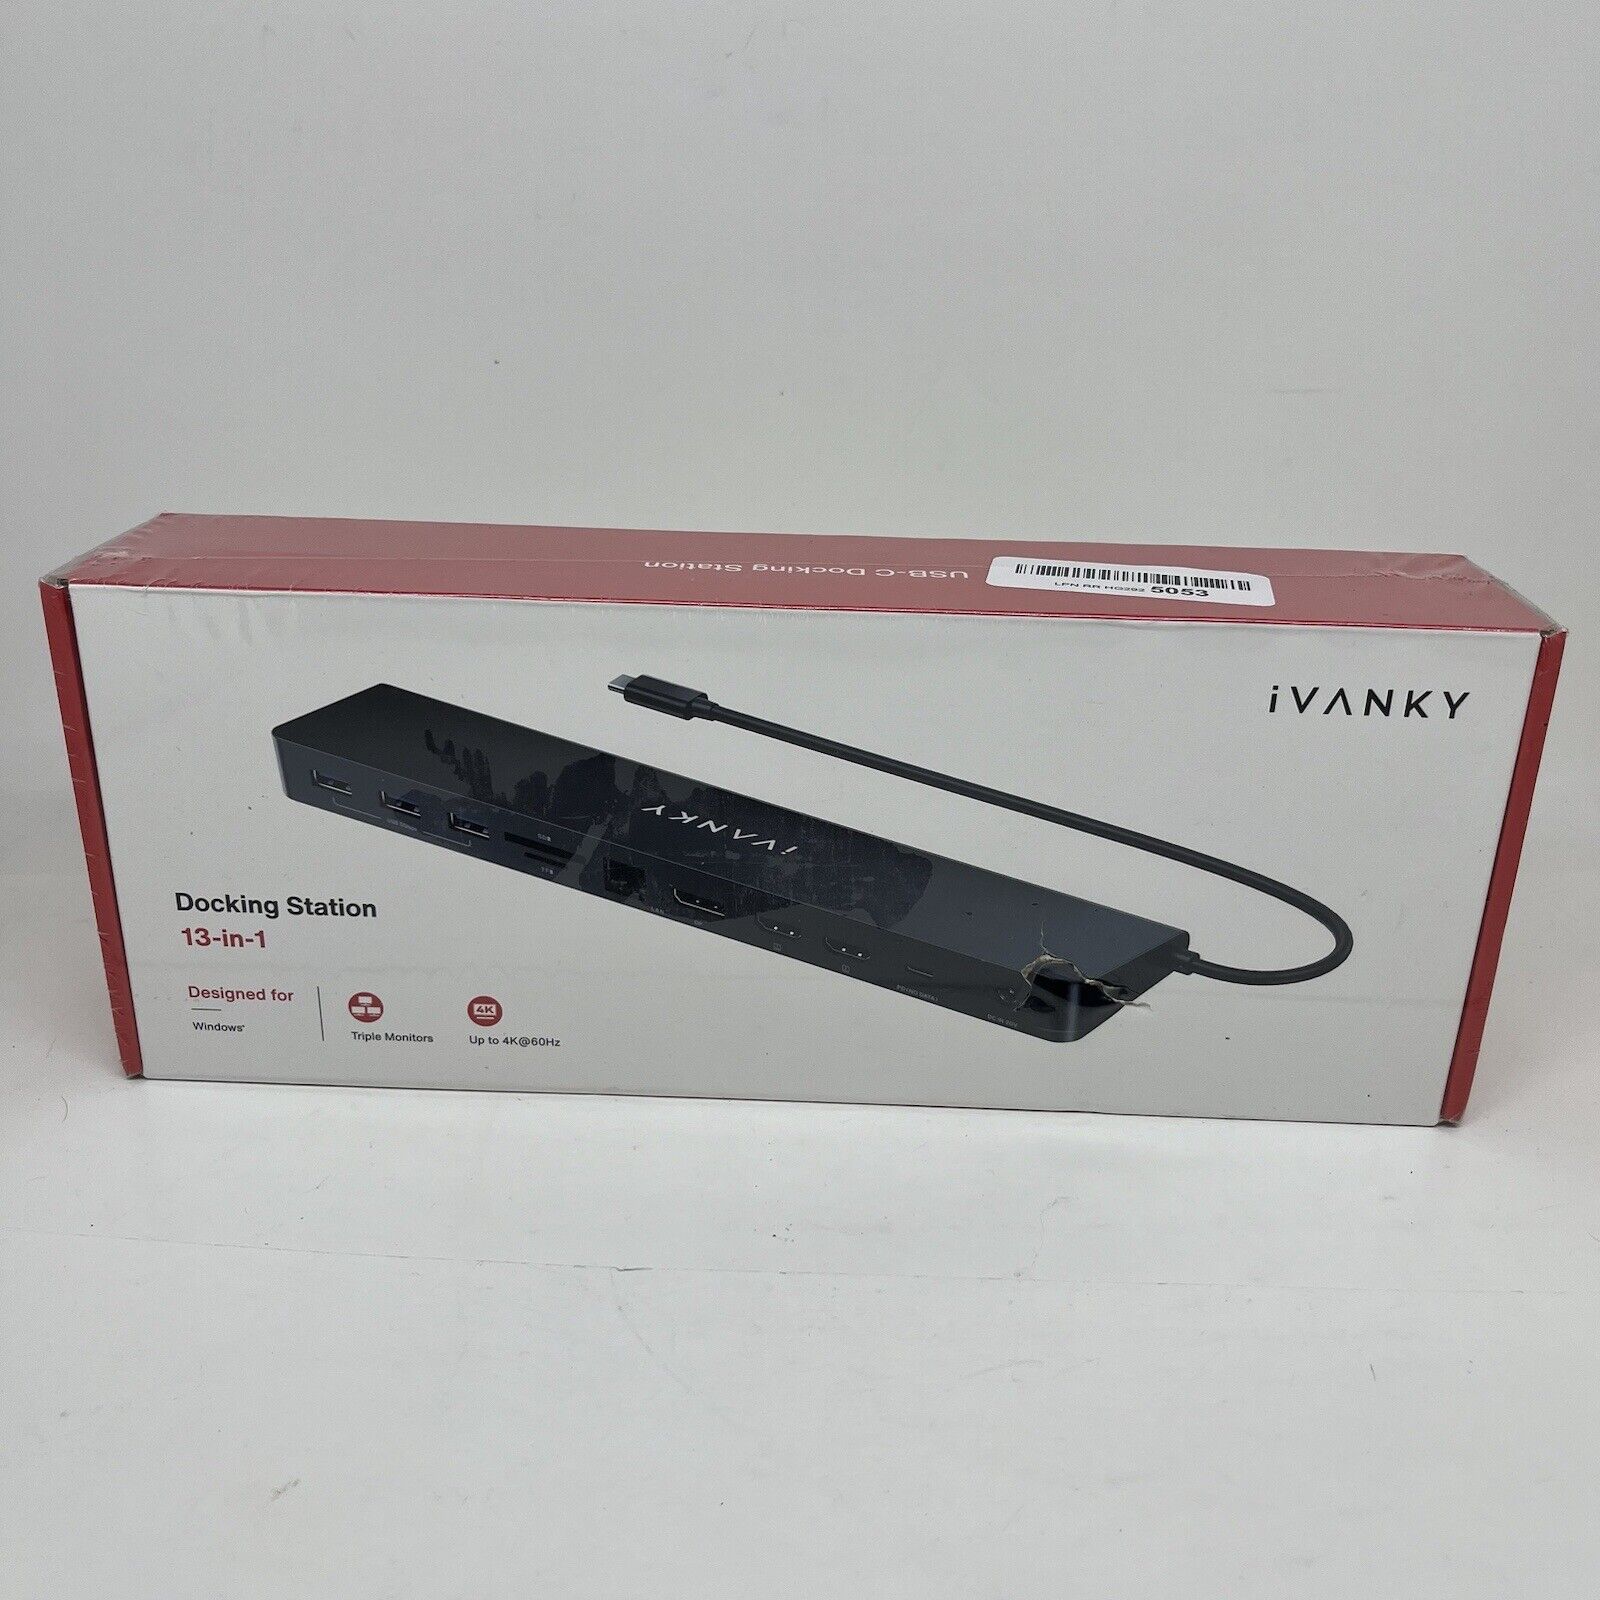 iVANKY EdgeDock 2 Laptop Docking Station with 100W Power Adapter, USB C 13-in-1